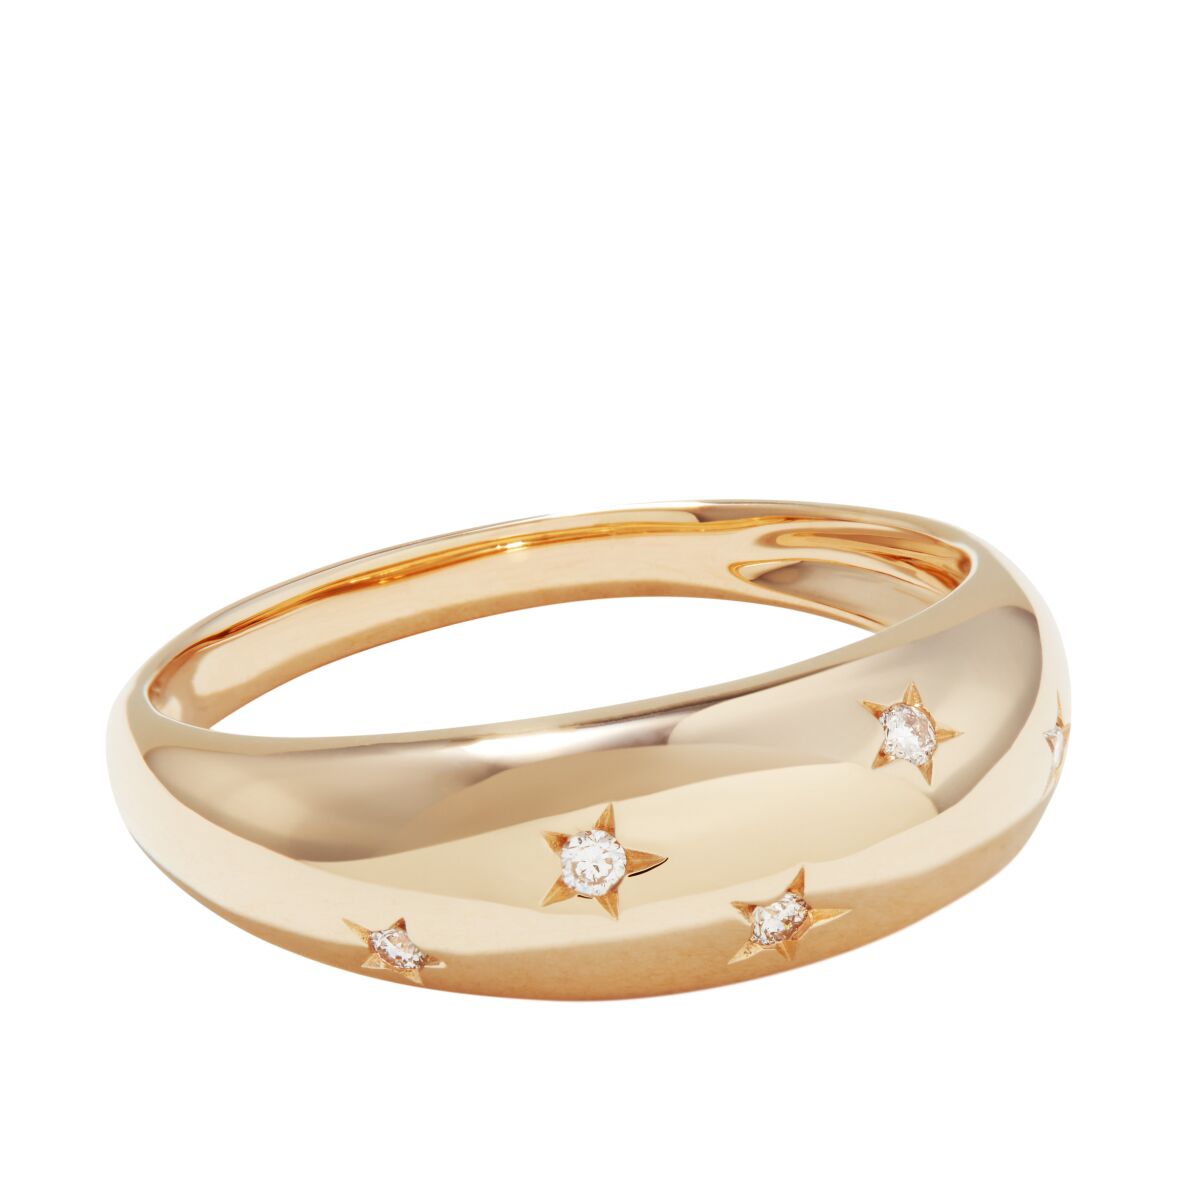 Mejuri's L.A. Dôme Ring in 14-karat gold with ethically sourced diamonds.